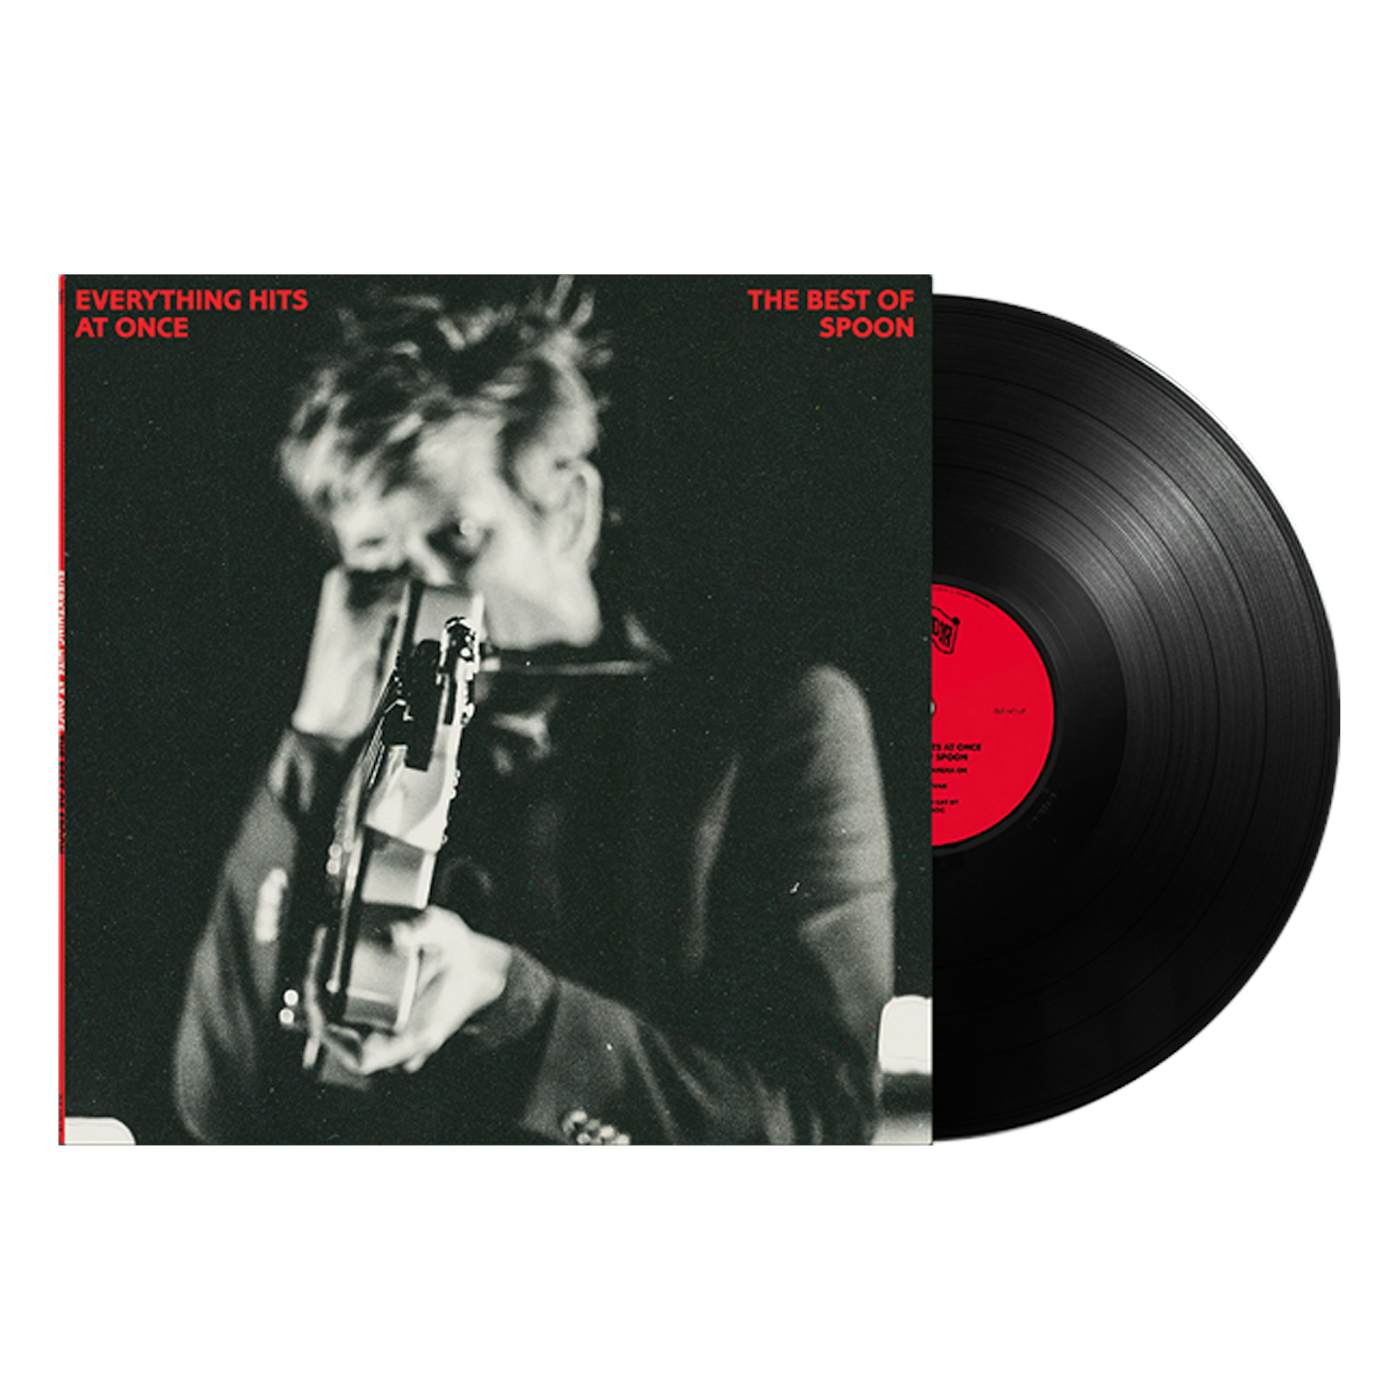 Spoon EVERYTHING HITS AT ONCE LP (Vinyl)